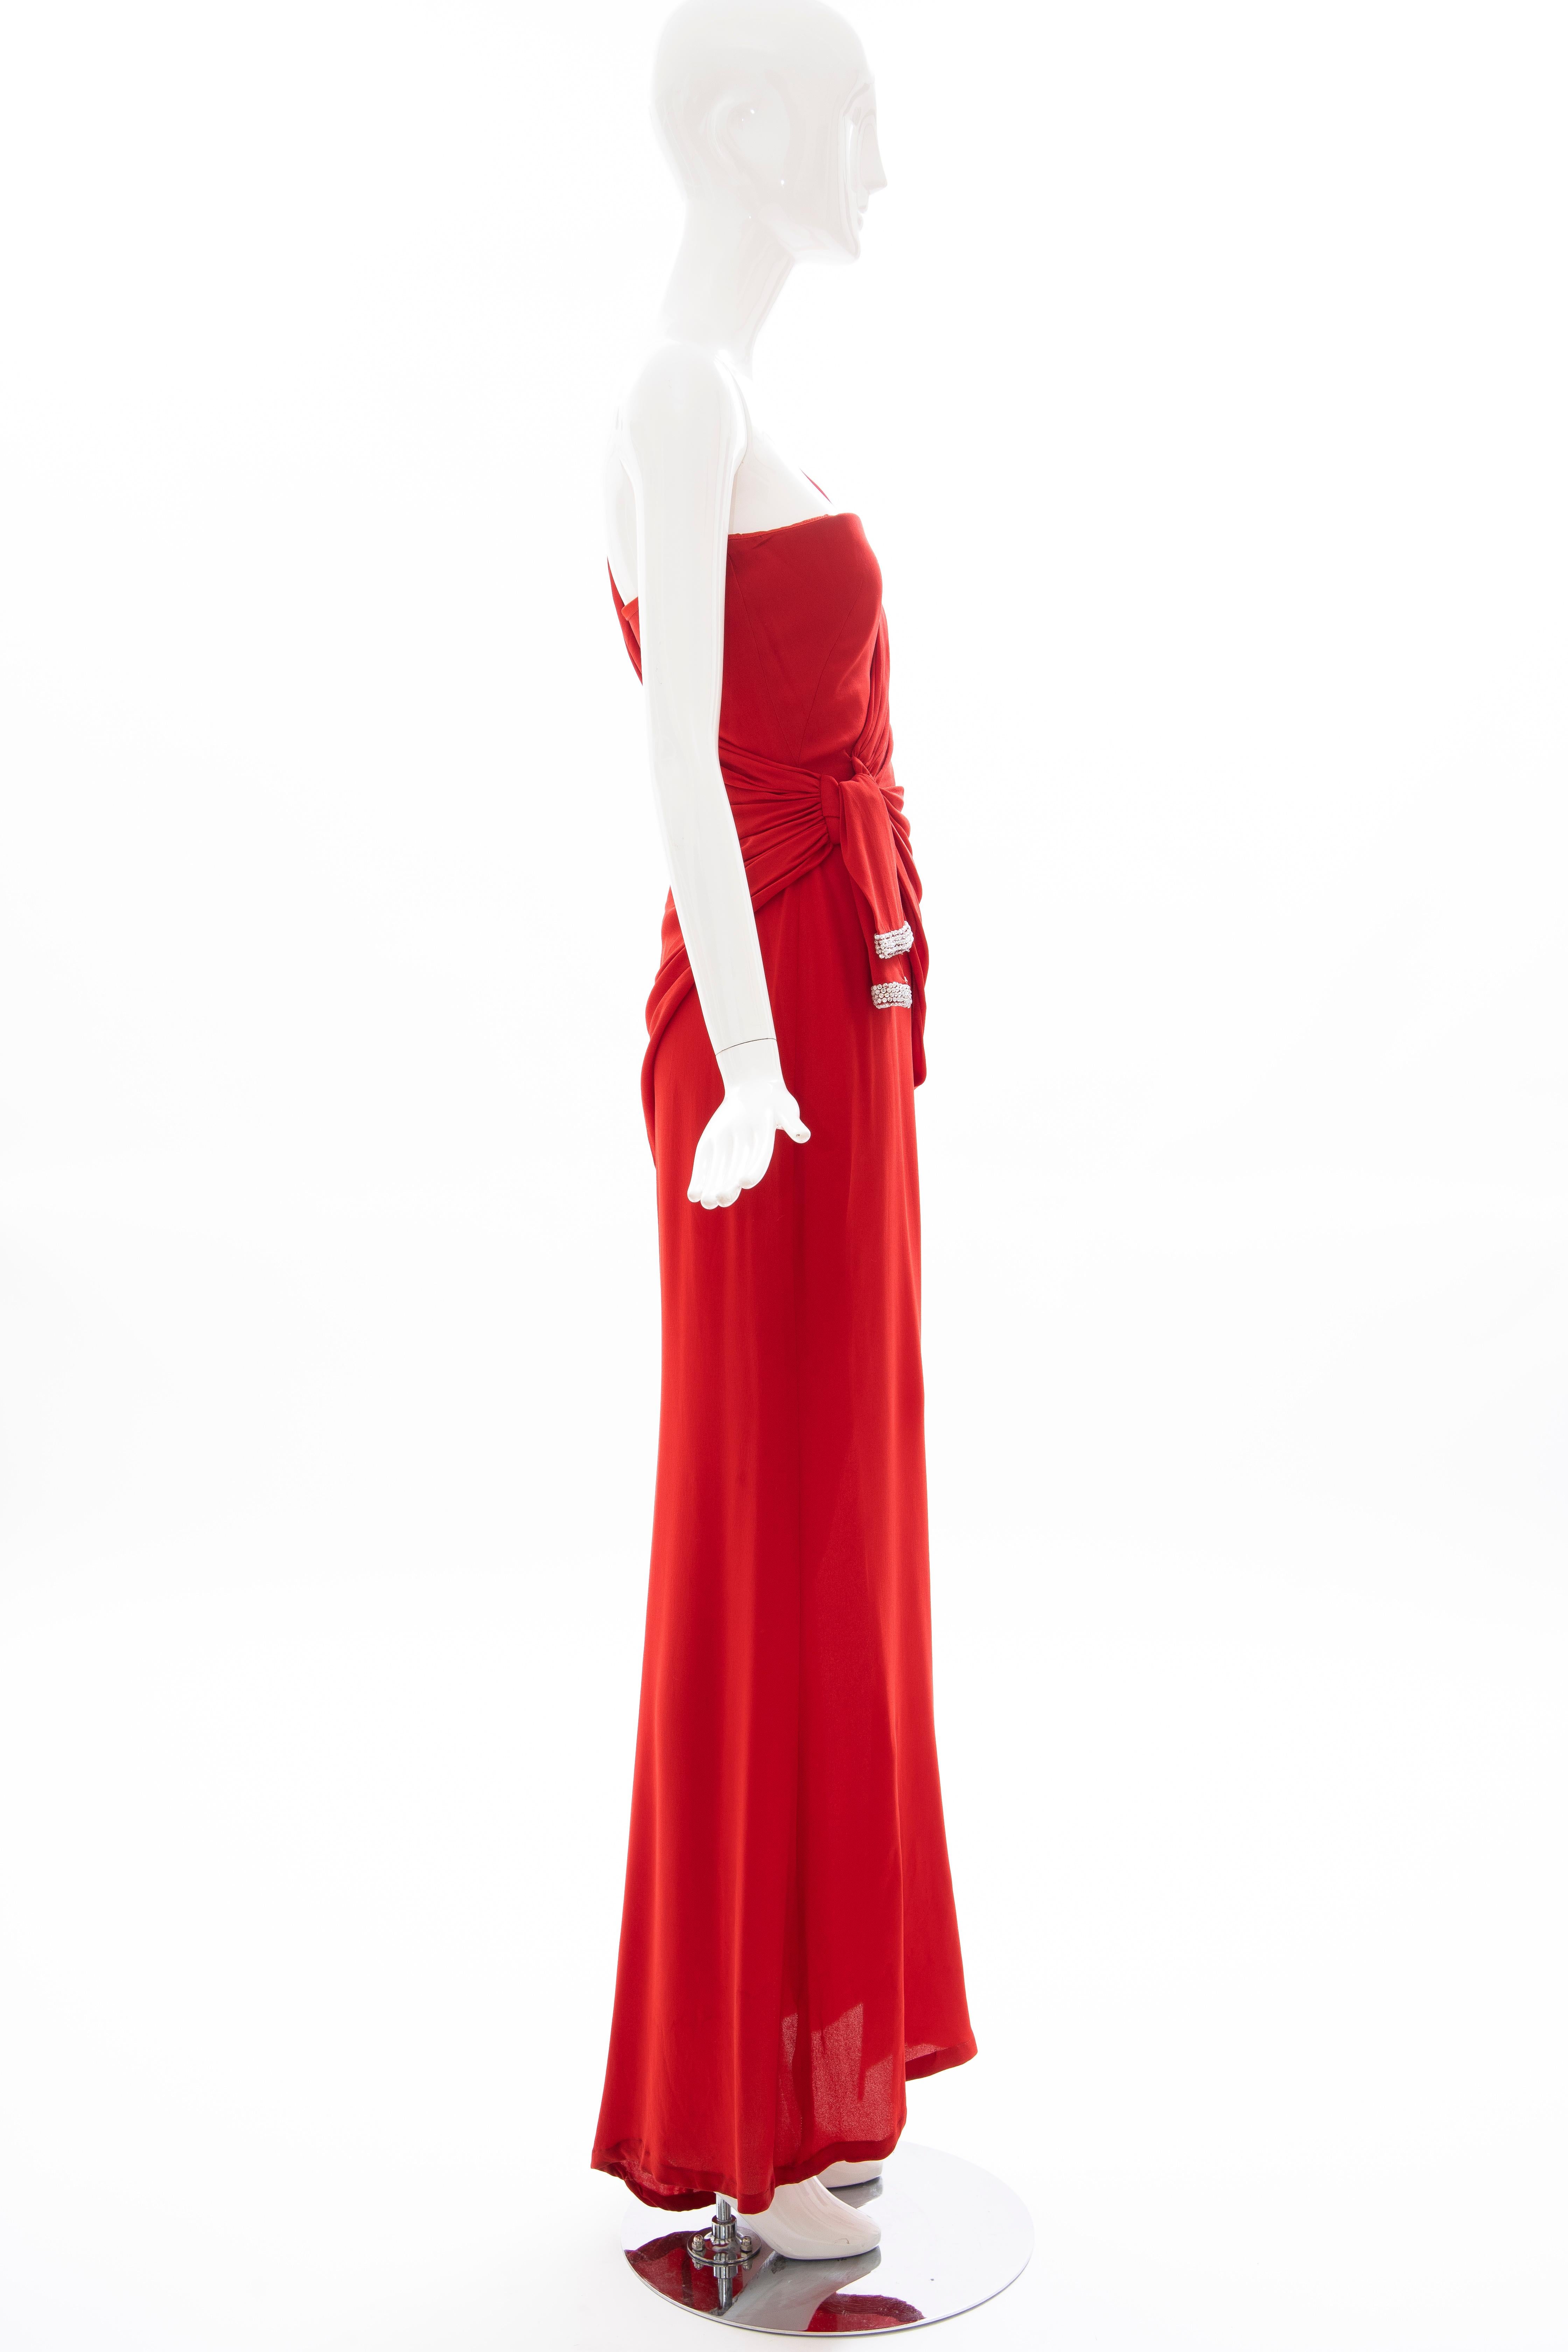 Valentino Runway Red Silk Crepe Evening Dress (Final Collection), Spring 2008 For Sale 1